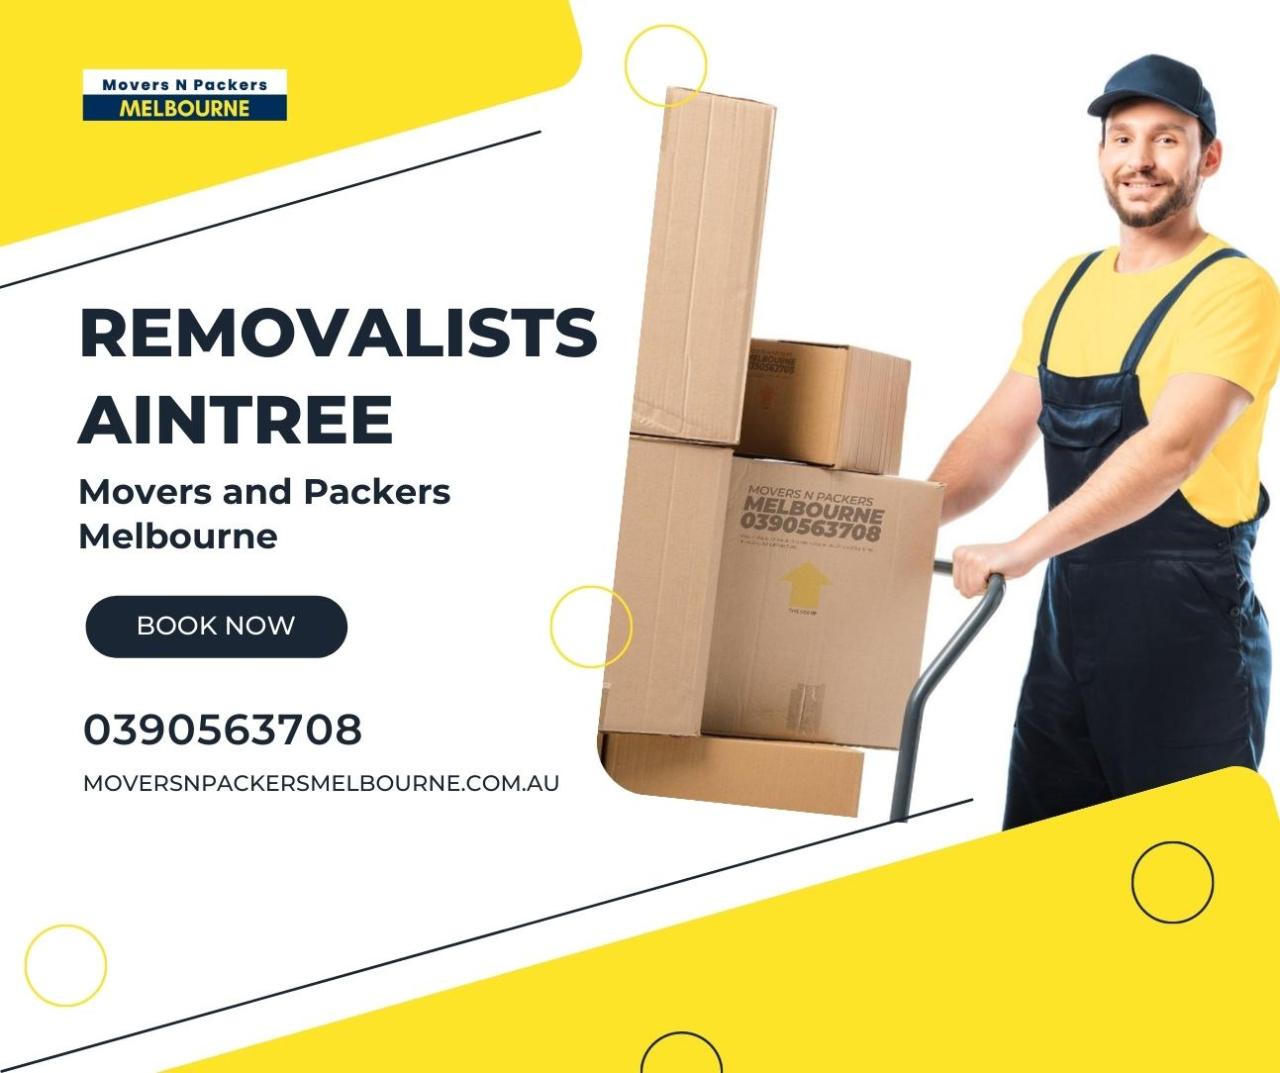 Movers Aintree | Removalists Aintree | Movers and Packers Melbourne